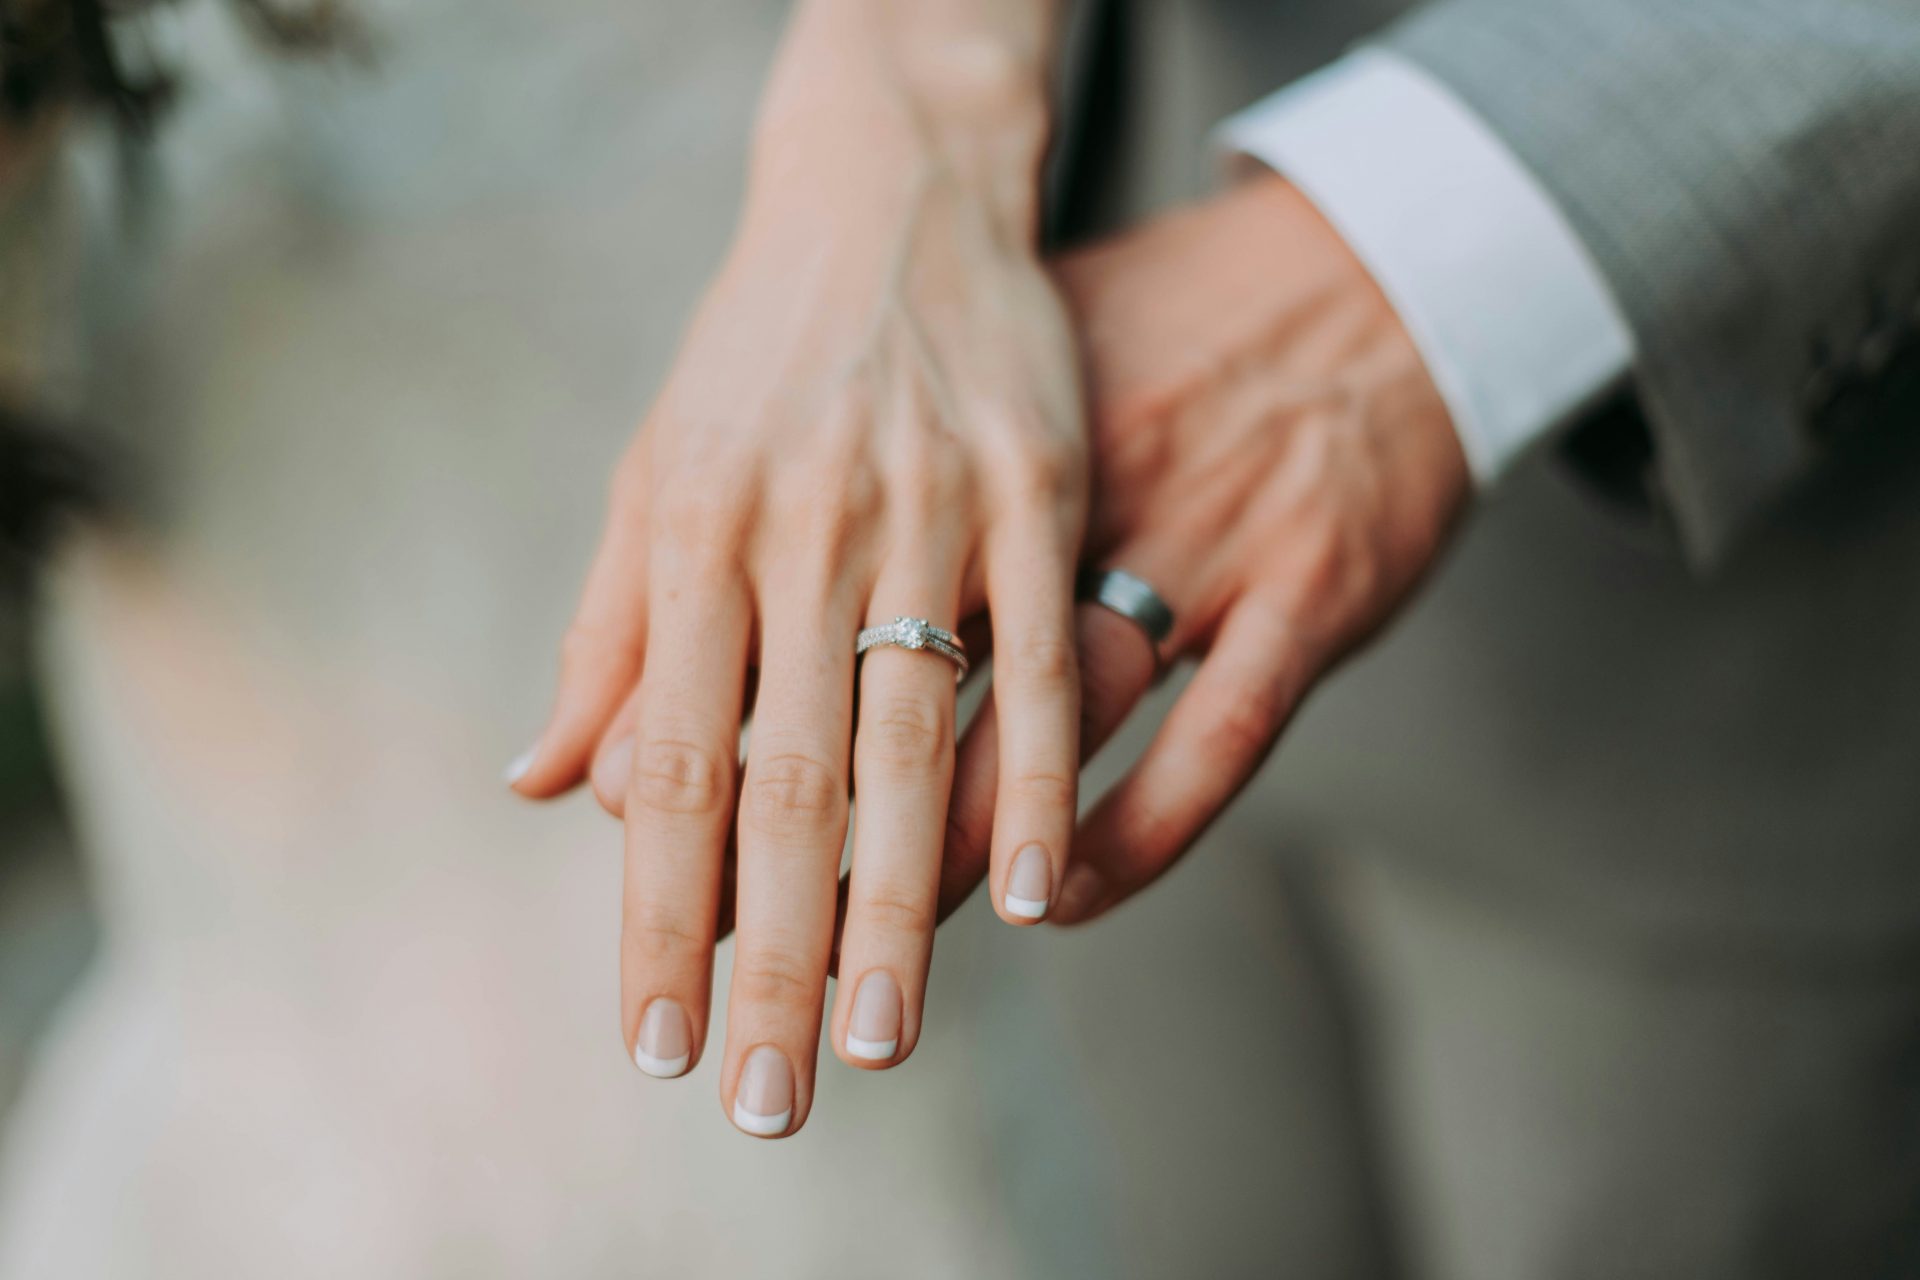 How does getting married affect you?